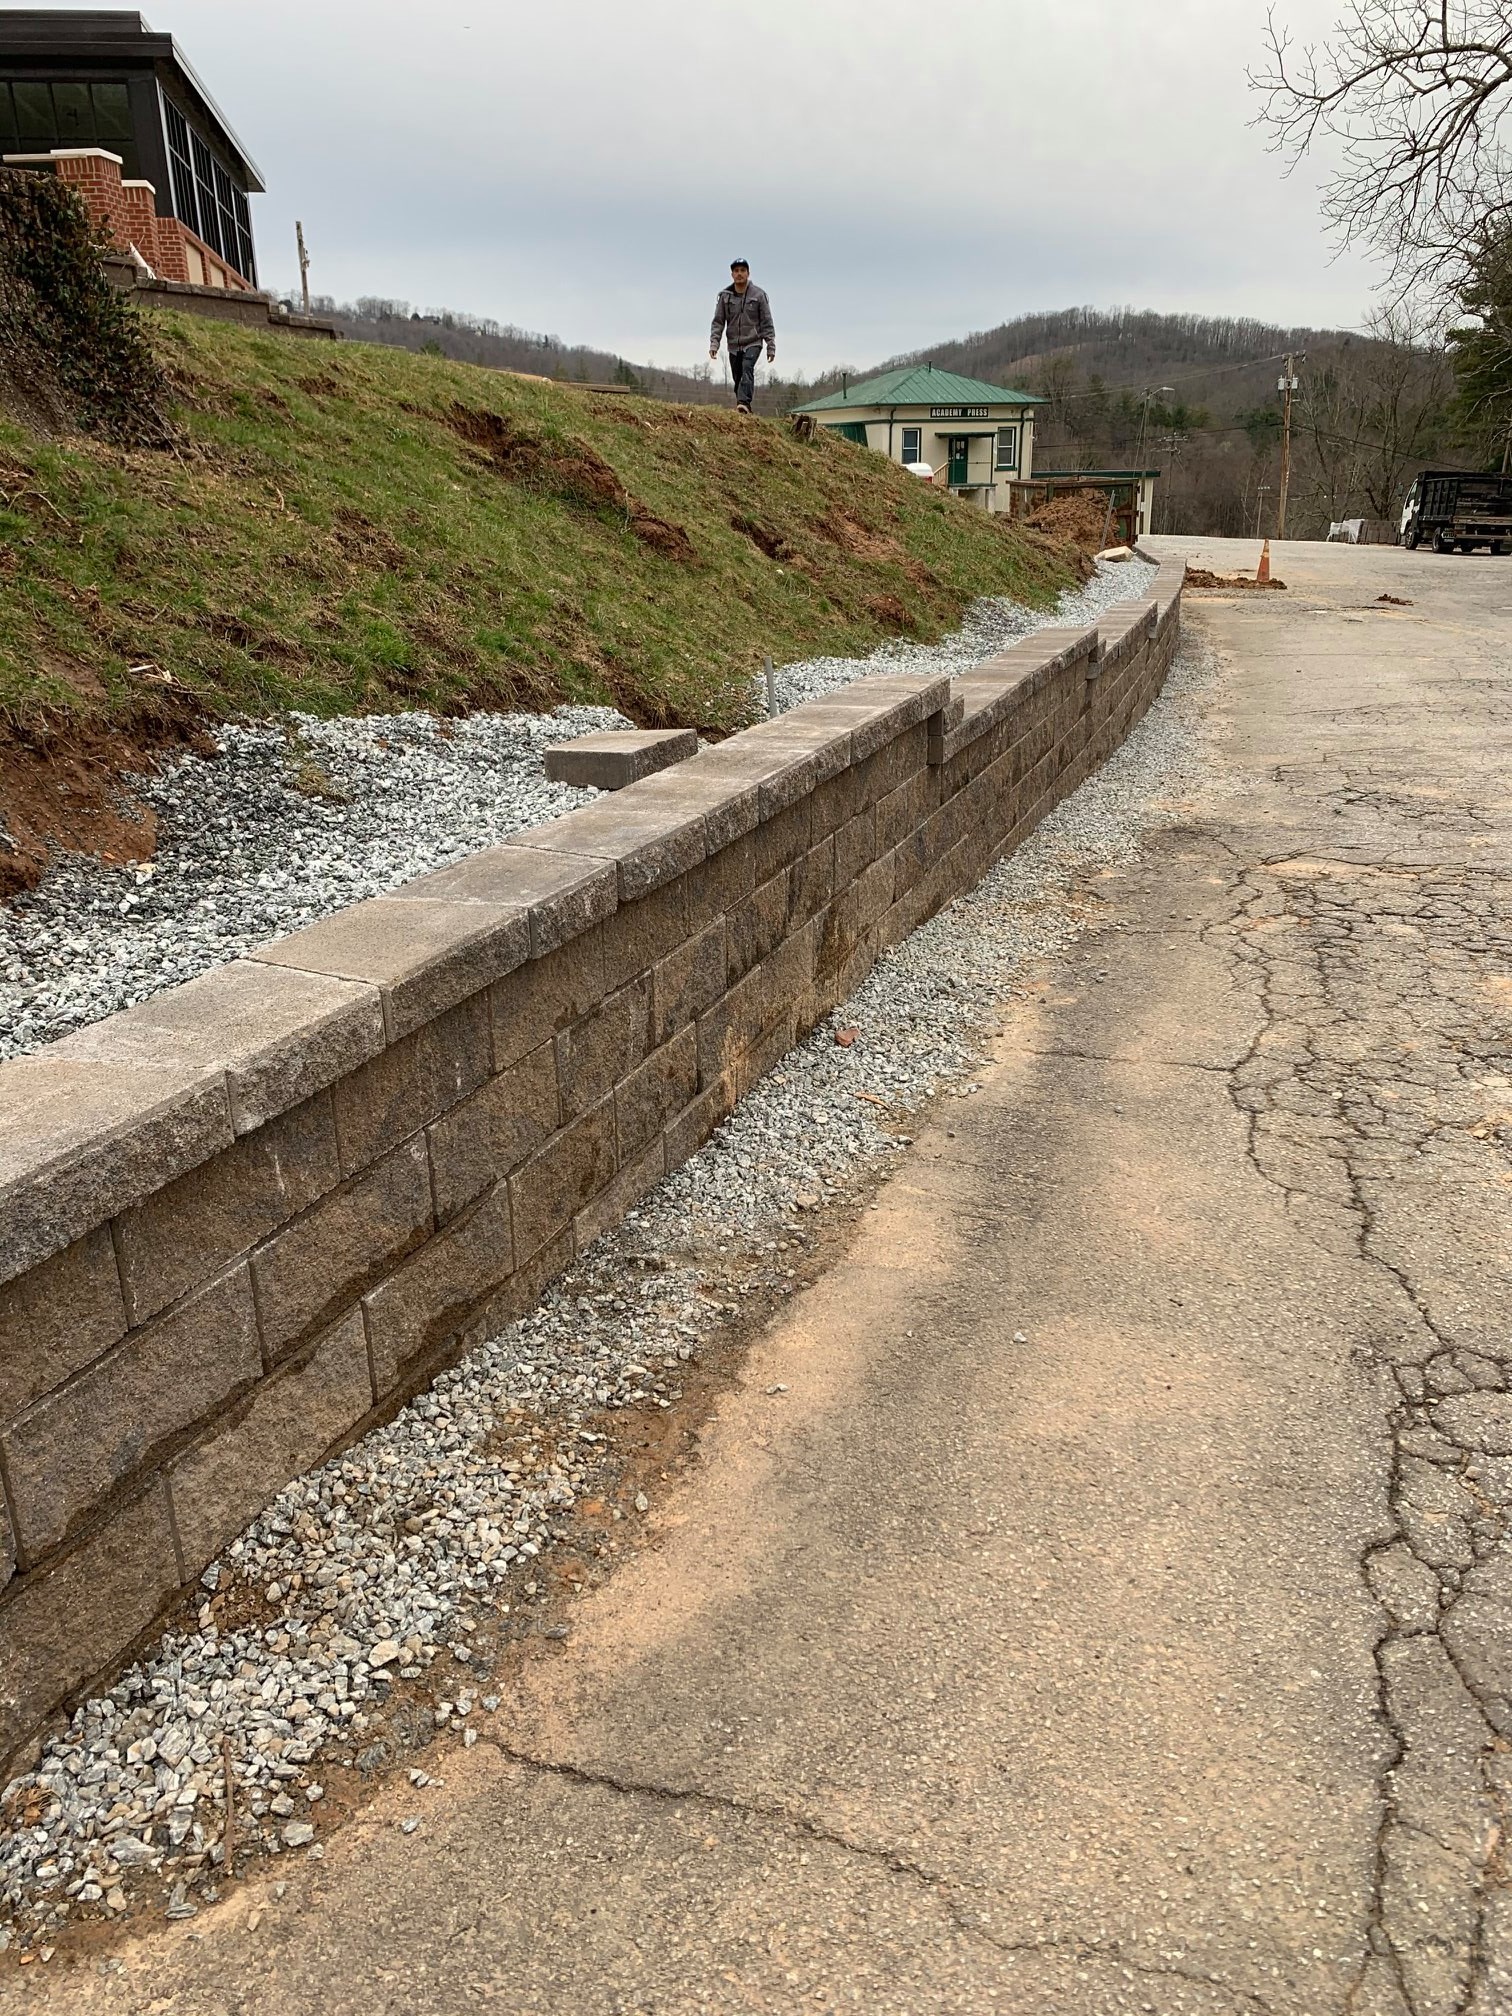 Retaining Wall Construction for HG Landscape Plus in Asheville, NC